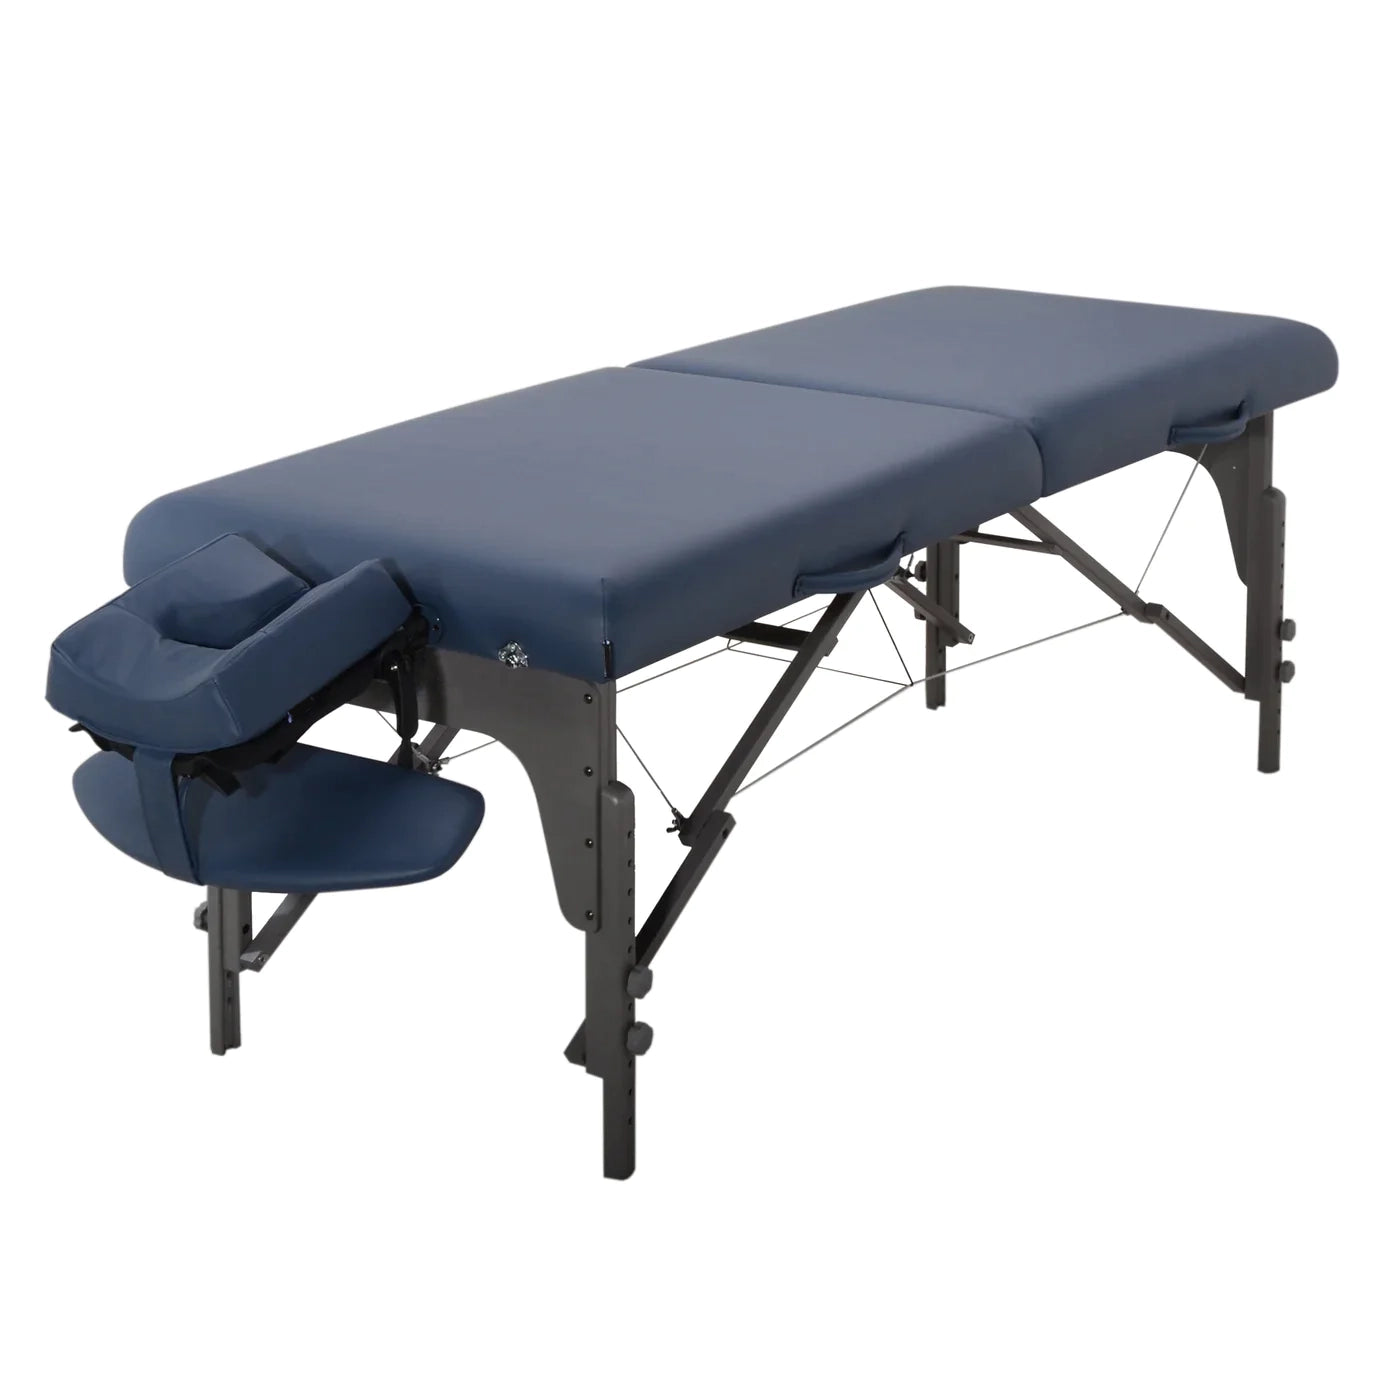 Spabodega 31" Montclair™ Portable Massage Table Package (Black) with Ambient Light System